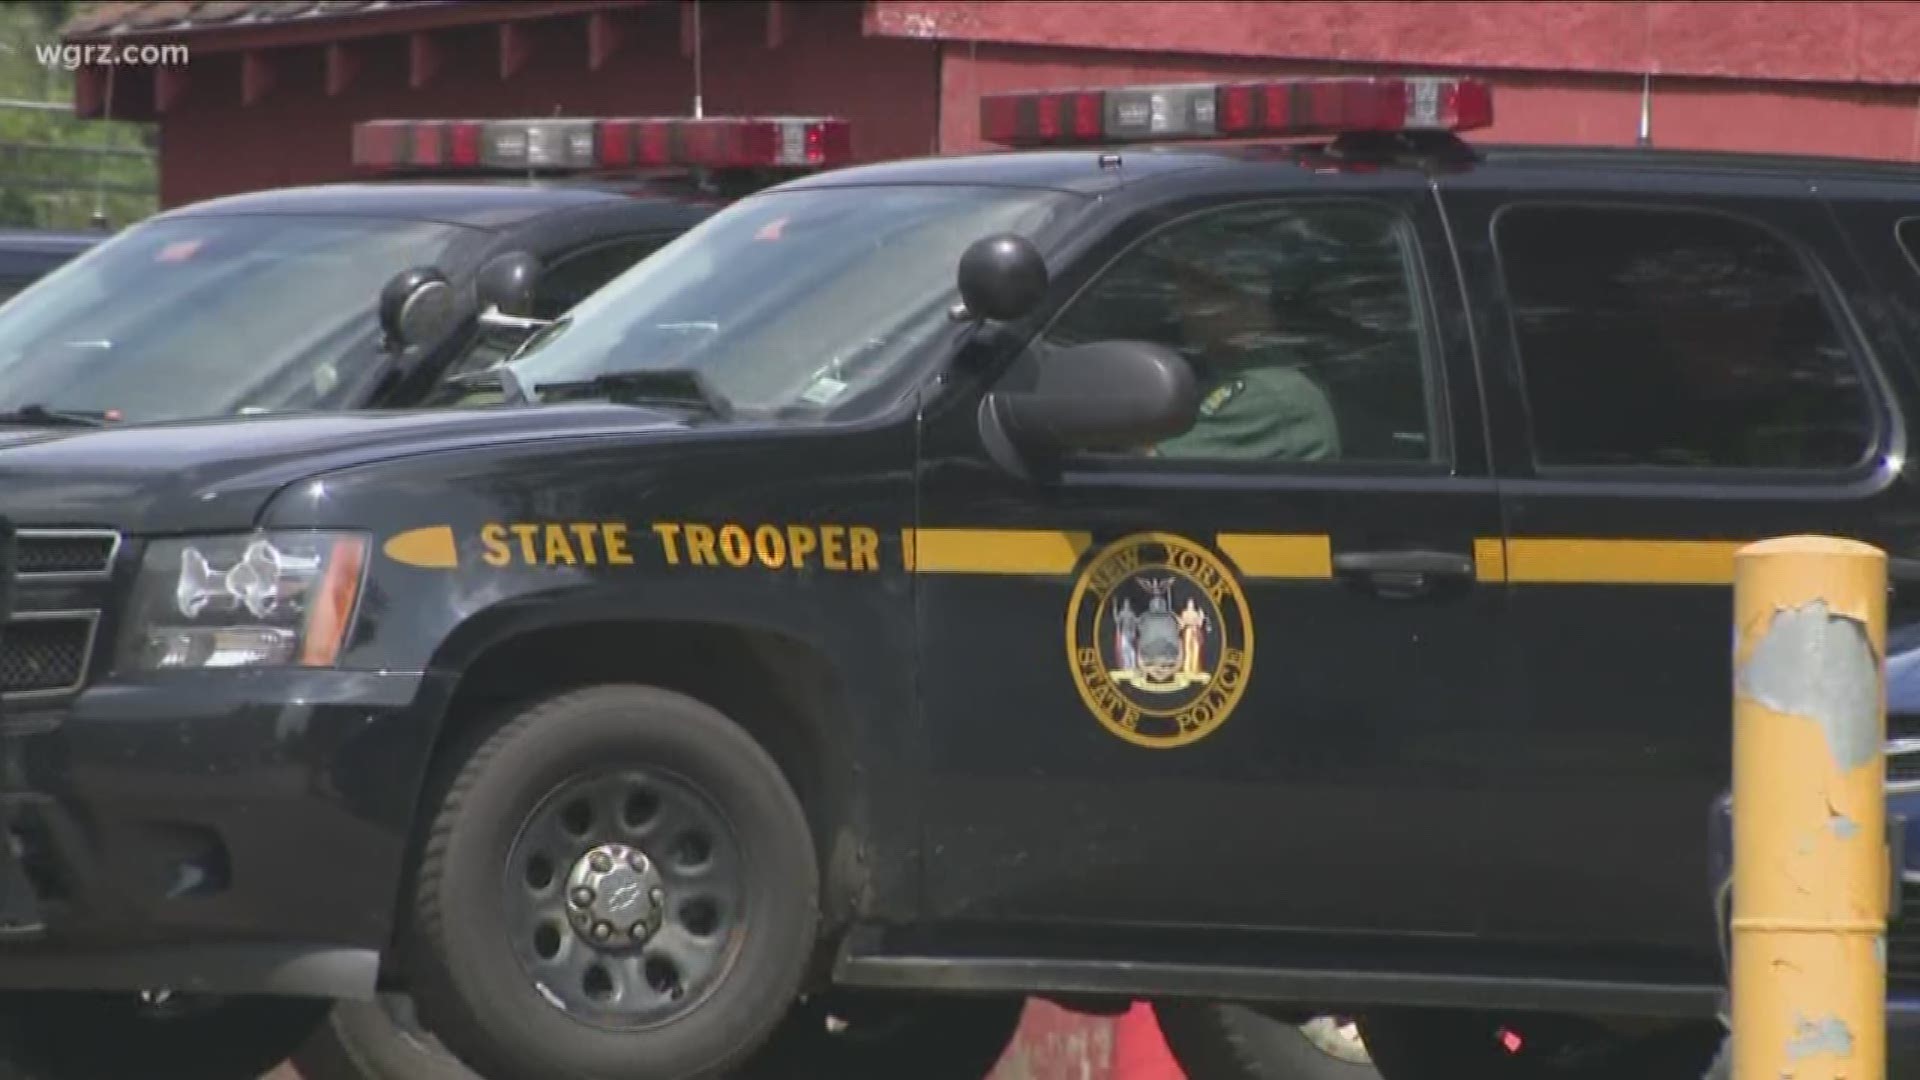 NYSP asks for the public's help to find a trooper's "misplaced" semi-automatic rifle, last seen in Olean